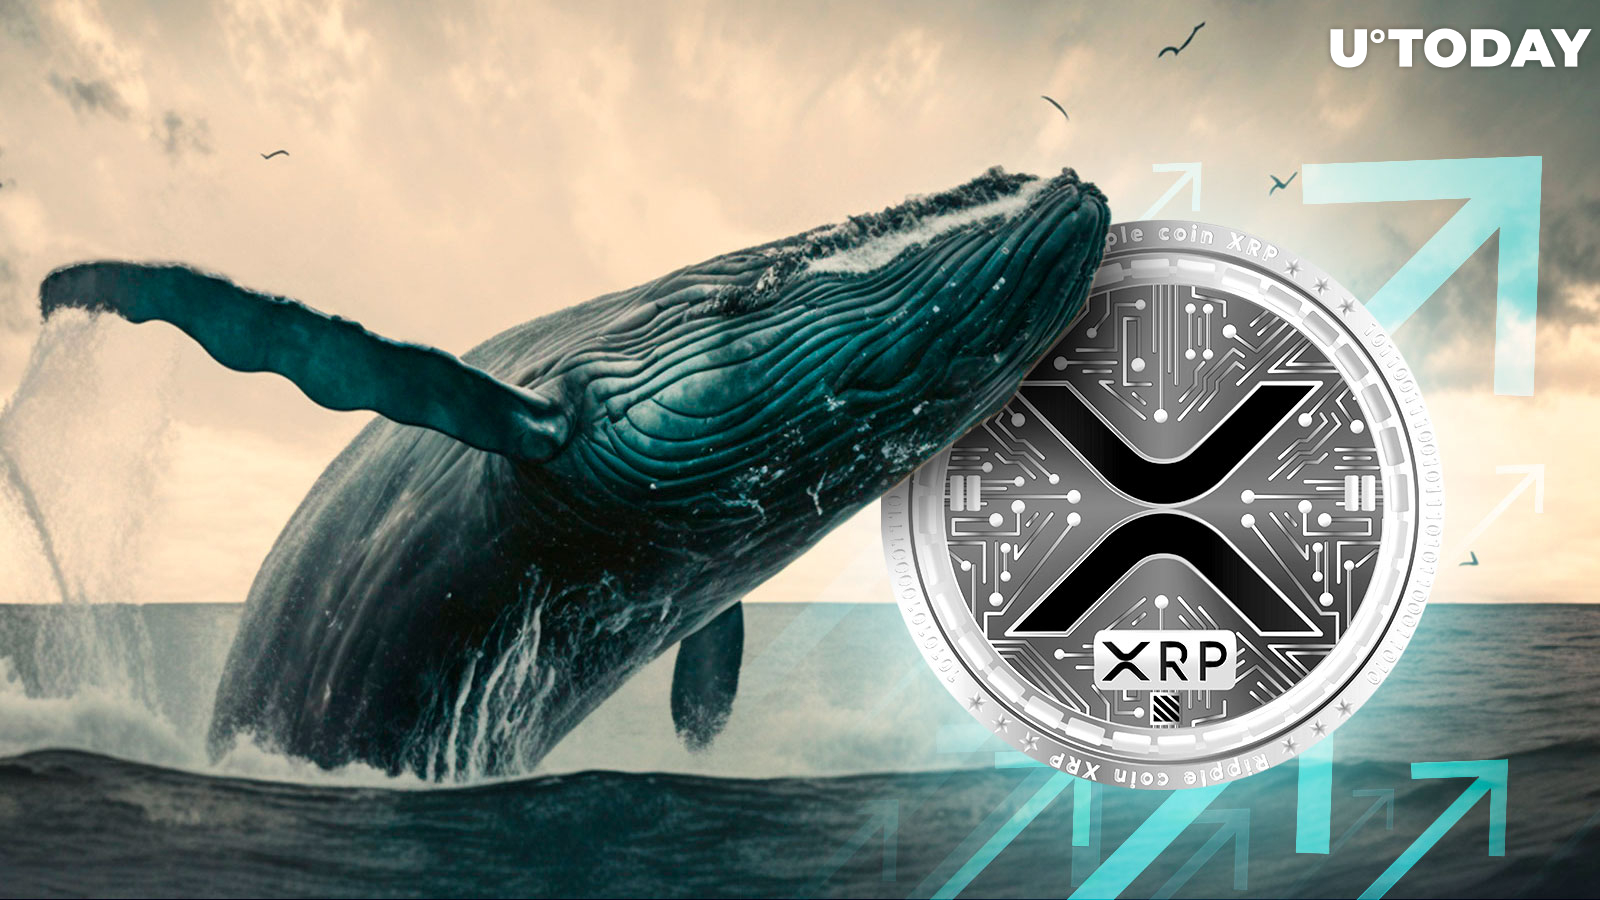 As XRP Price Recovers, Whale Activity and Wallet Holdings Surge